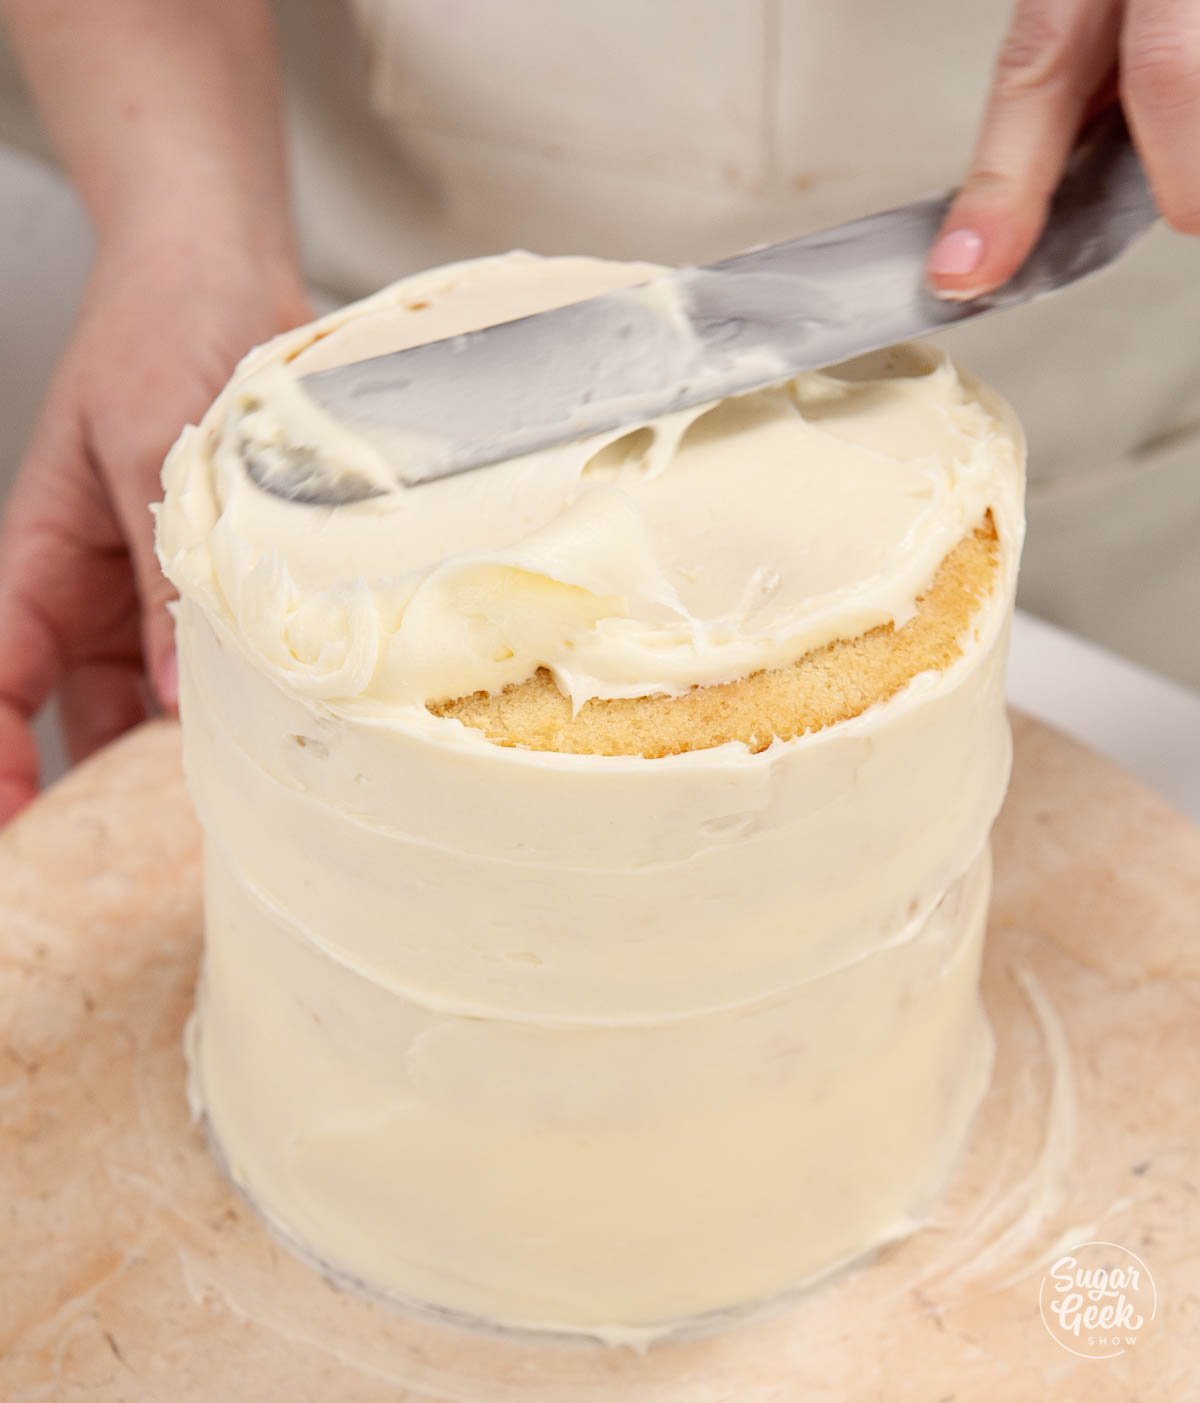 covering the lemon cake in a crumbcoat